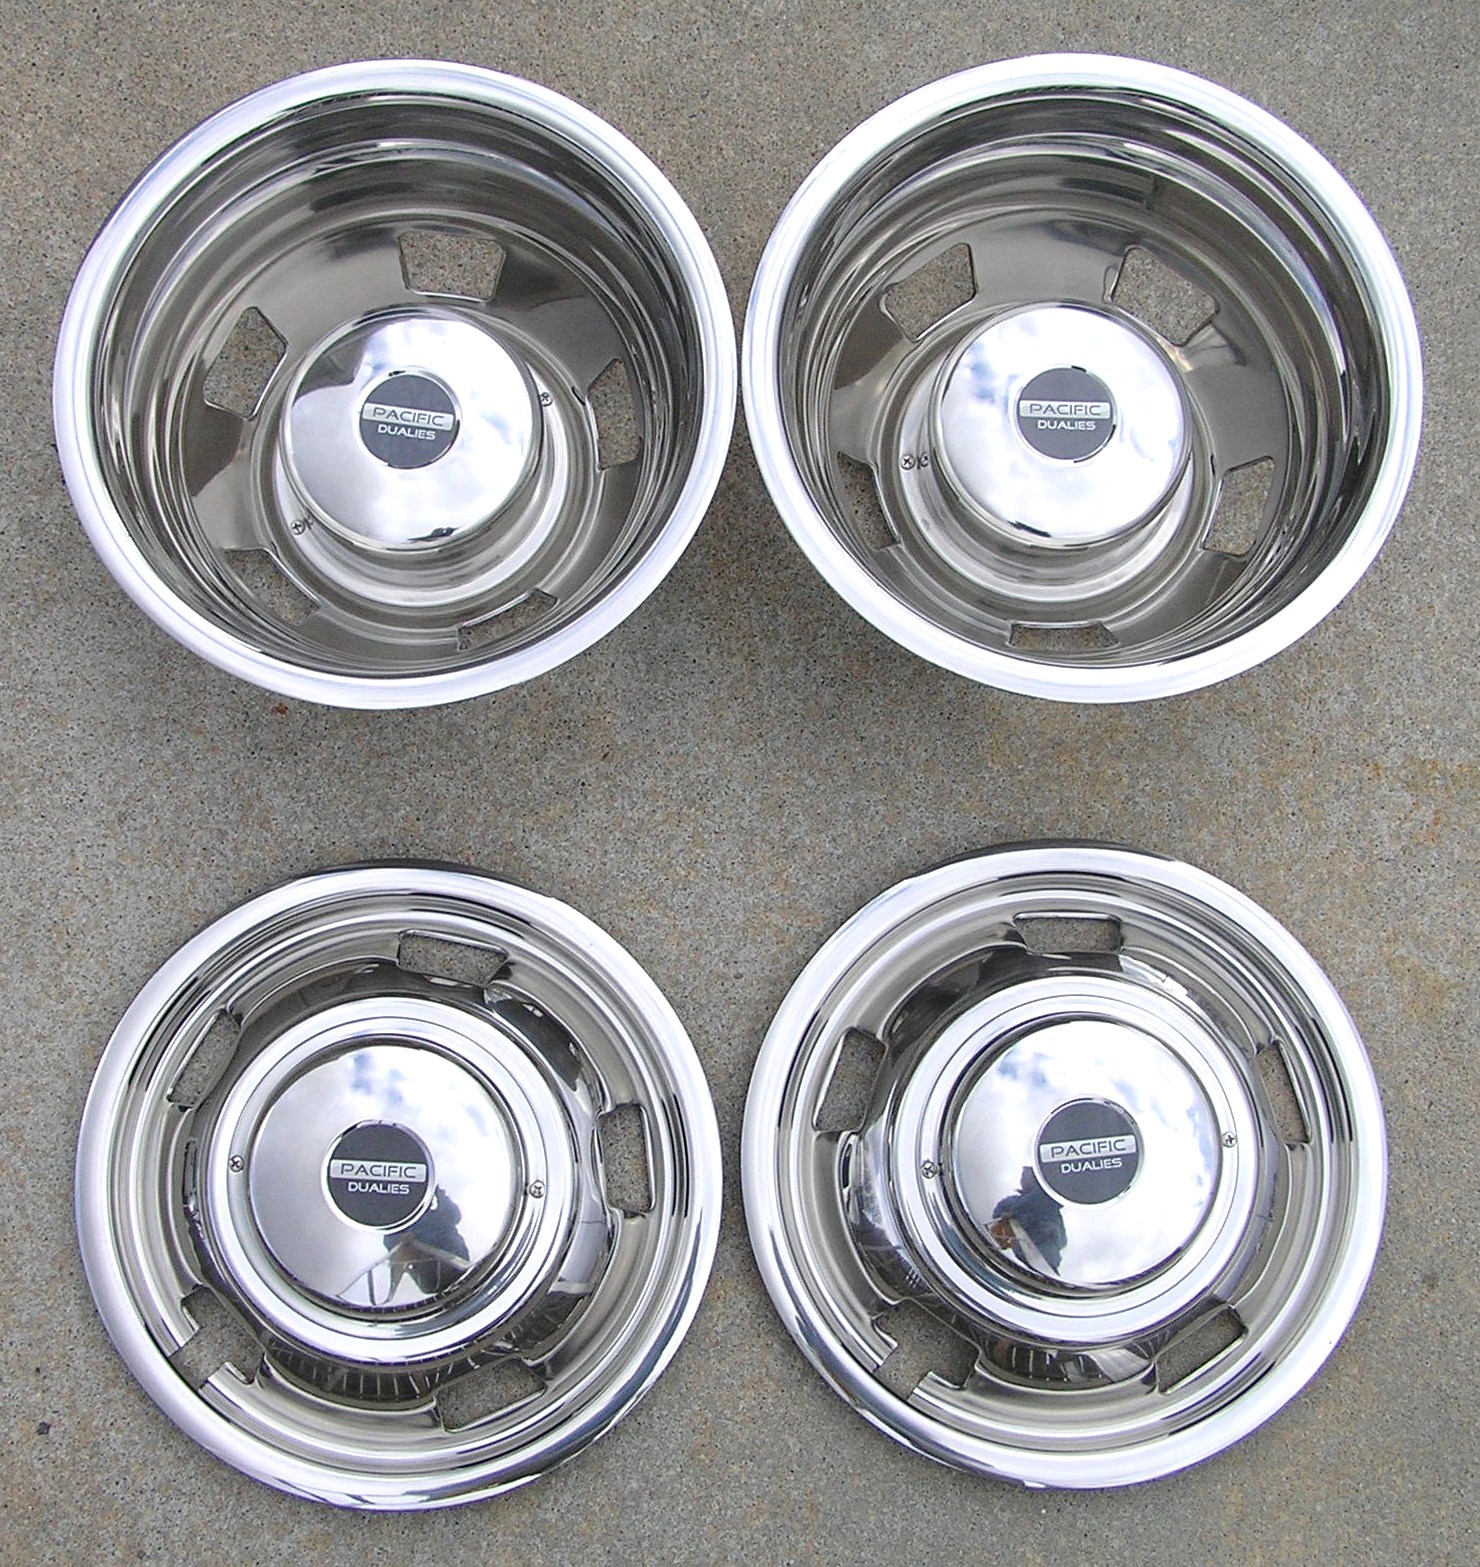 JSD1608 DODGE RAM 3500 16 INCH STAINLESS STEEL POUND ON  HUBCAPS SIMULATORS 